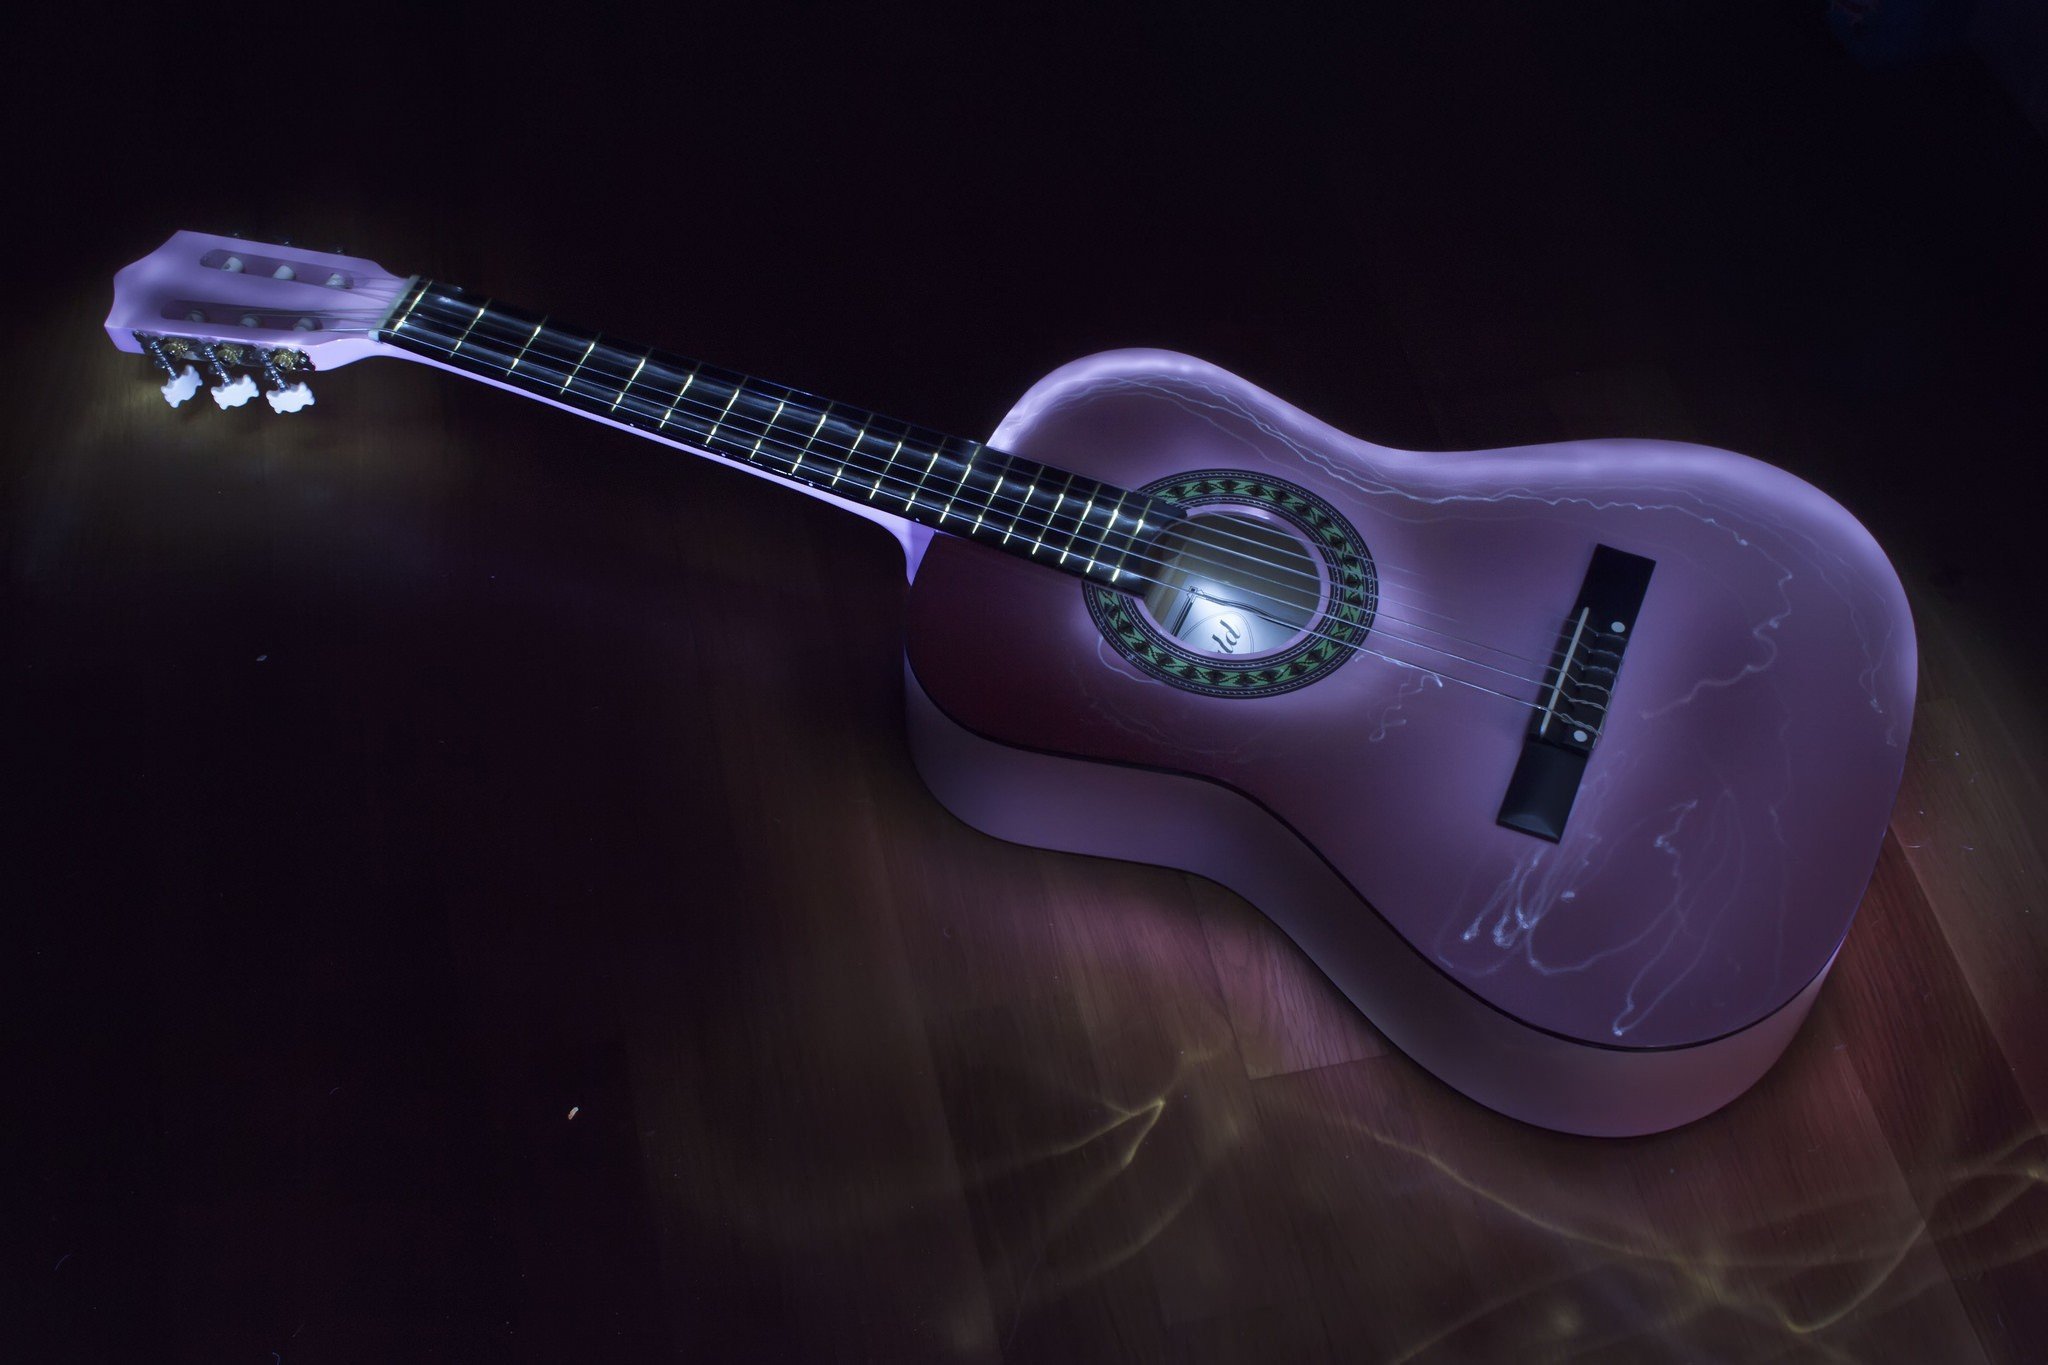 Guitar Amazing Art, HD Music, 4k Wallpaper, Image, Background, Photo and Picture